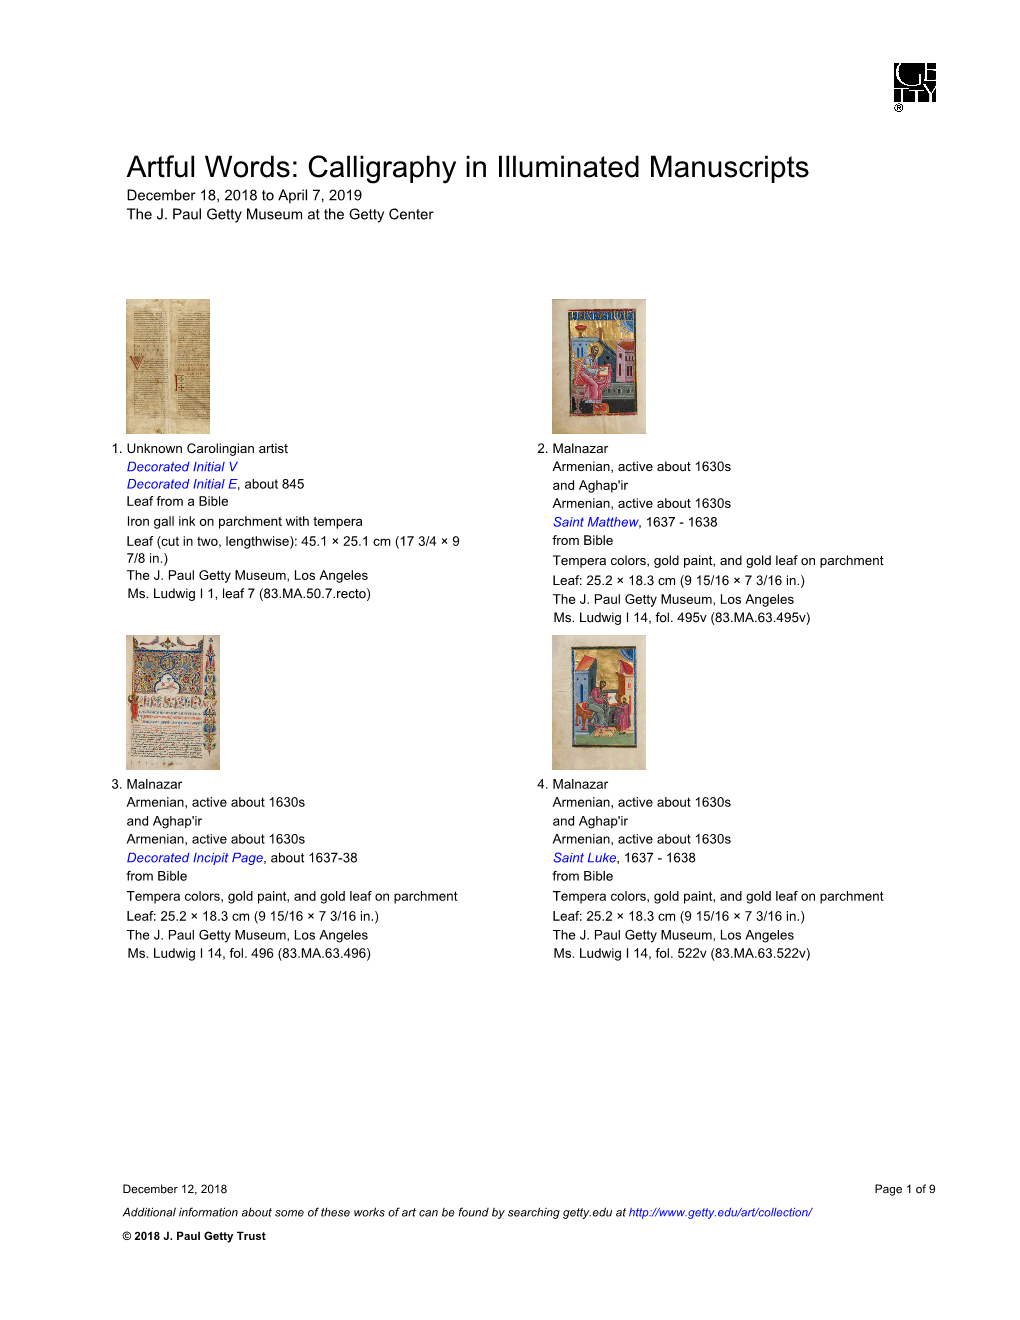 Artful Words: Calligraphy in Illuminated Manuscripts December 18, 2018 to April 7, 2019 the J